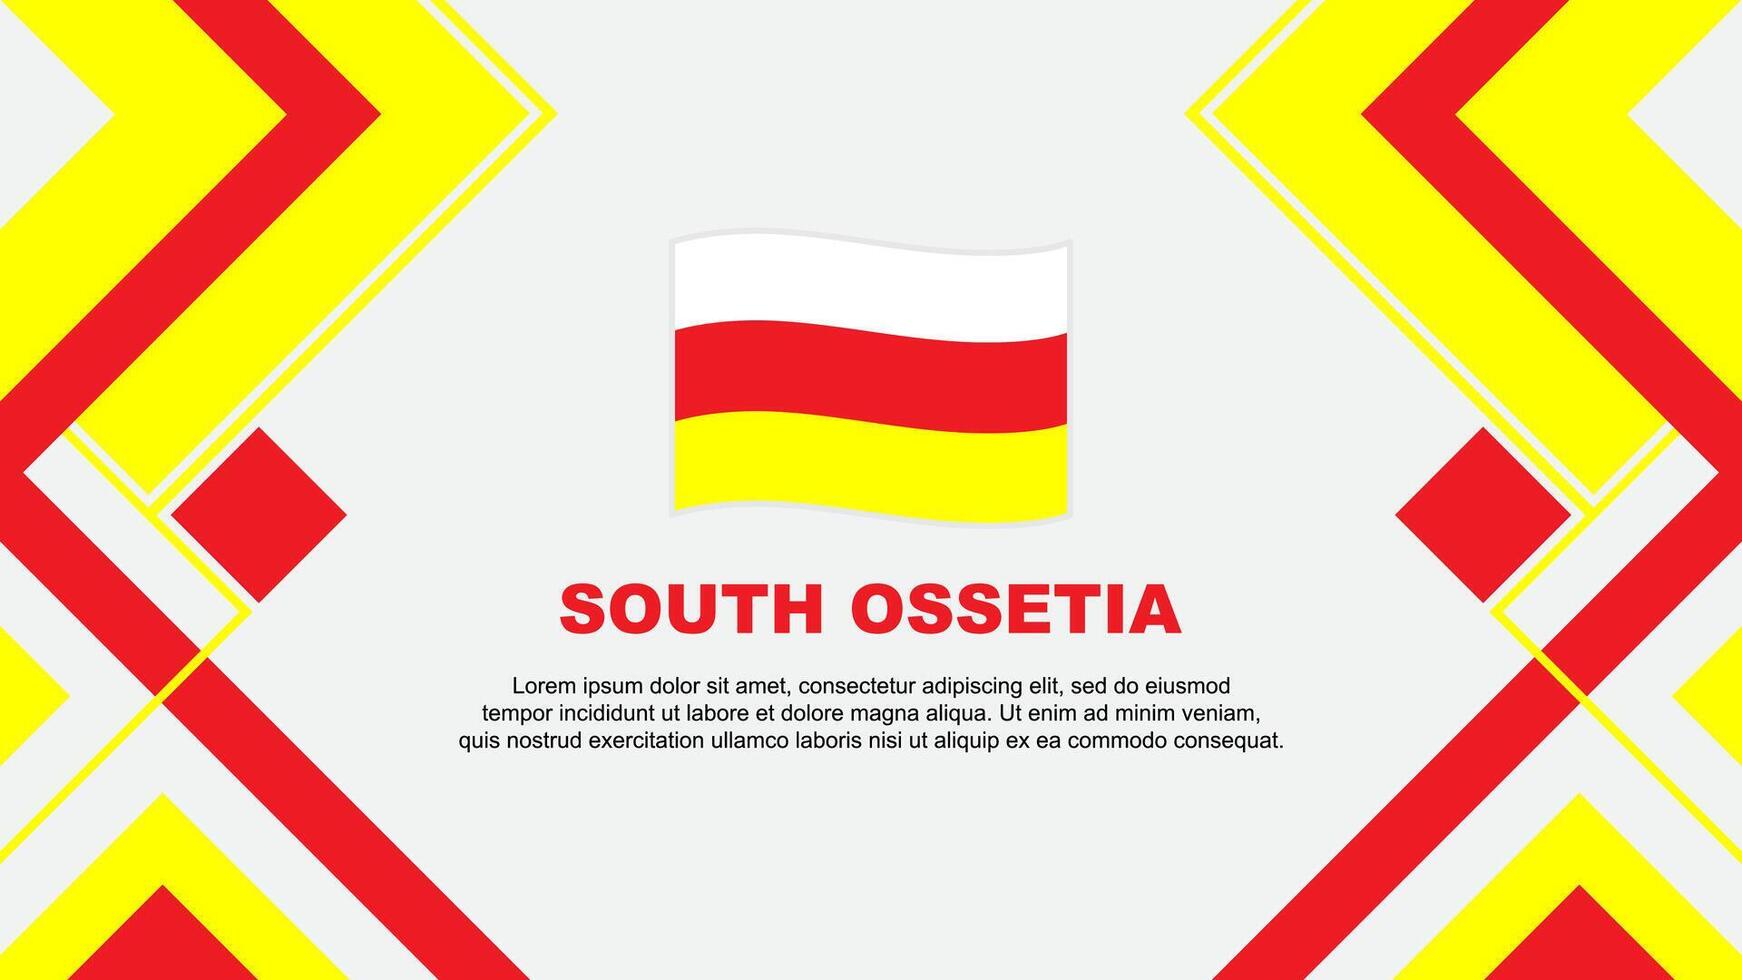 South Ossetia Flag Abstract Background Design Template. South Ossetia Independence Day Banner Wallpaper Vector Illustration. South Ossetia Banner